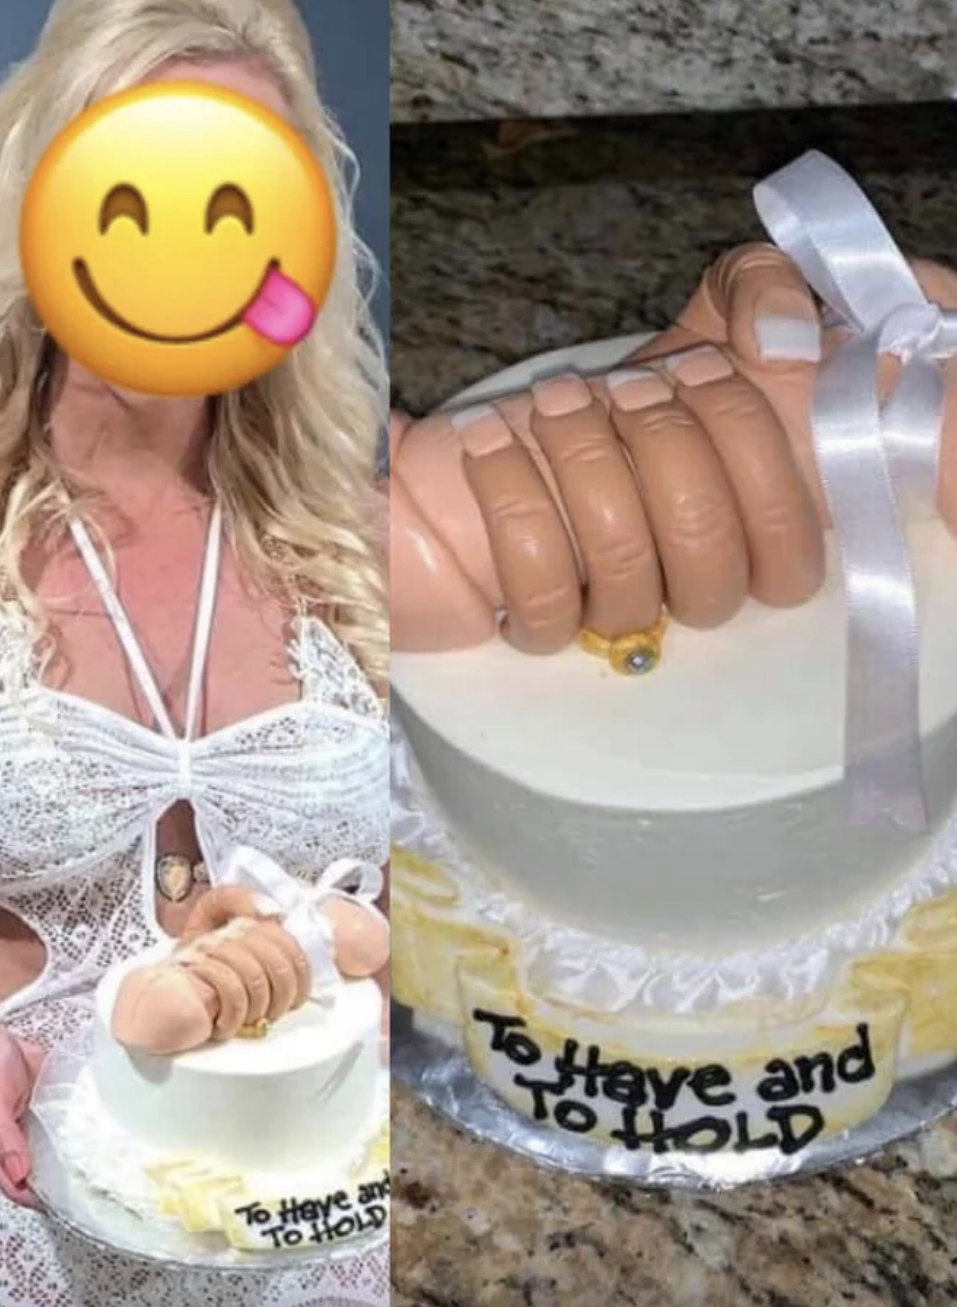 The cake is topped with a penis that has a hand wrapped around it